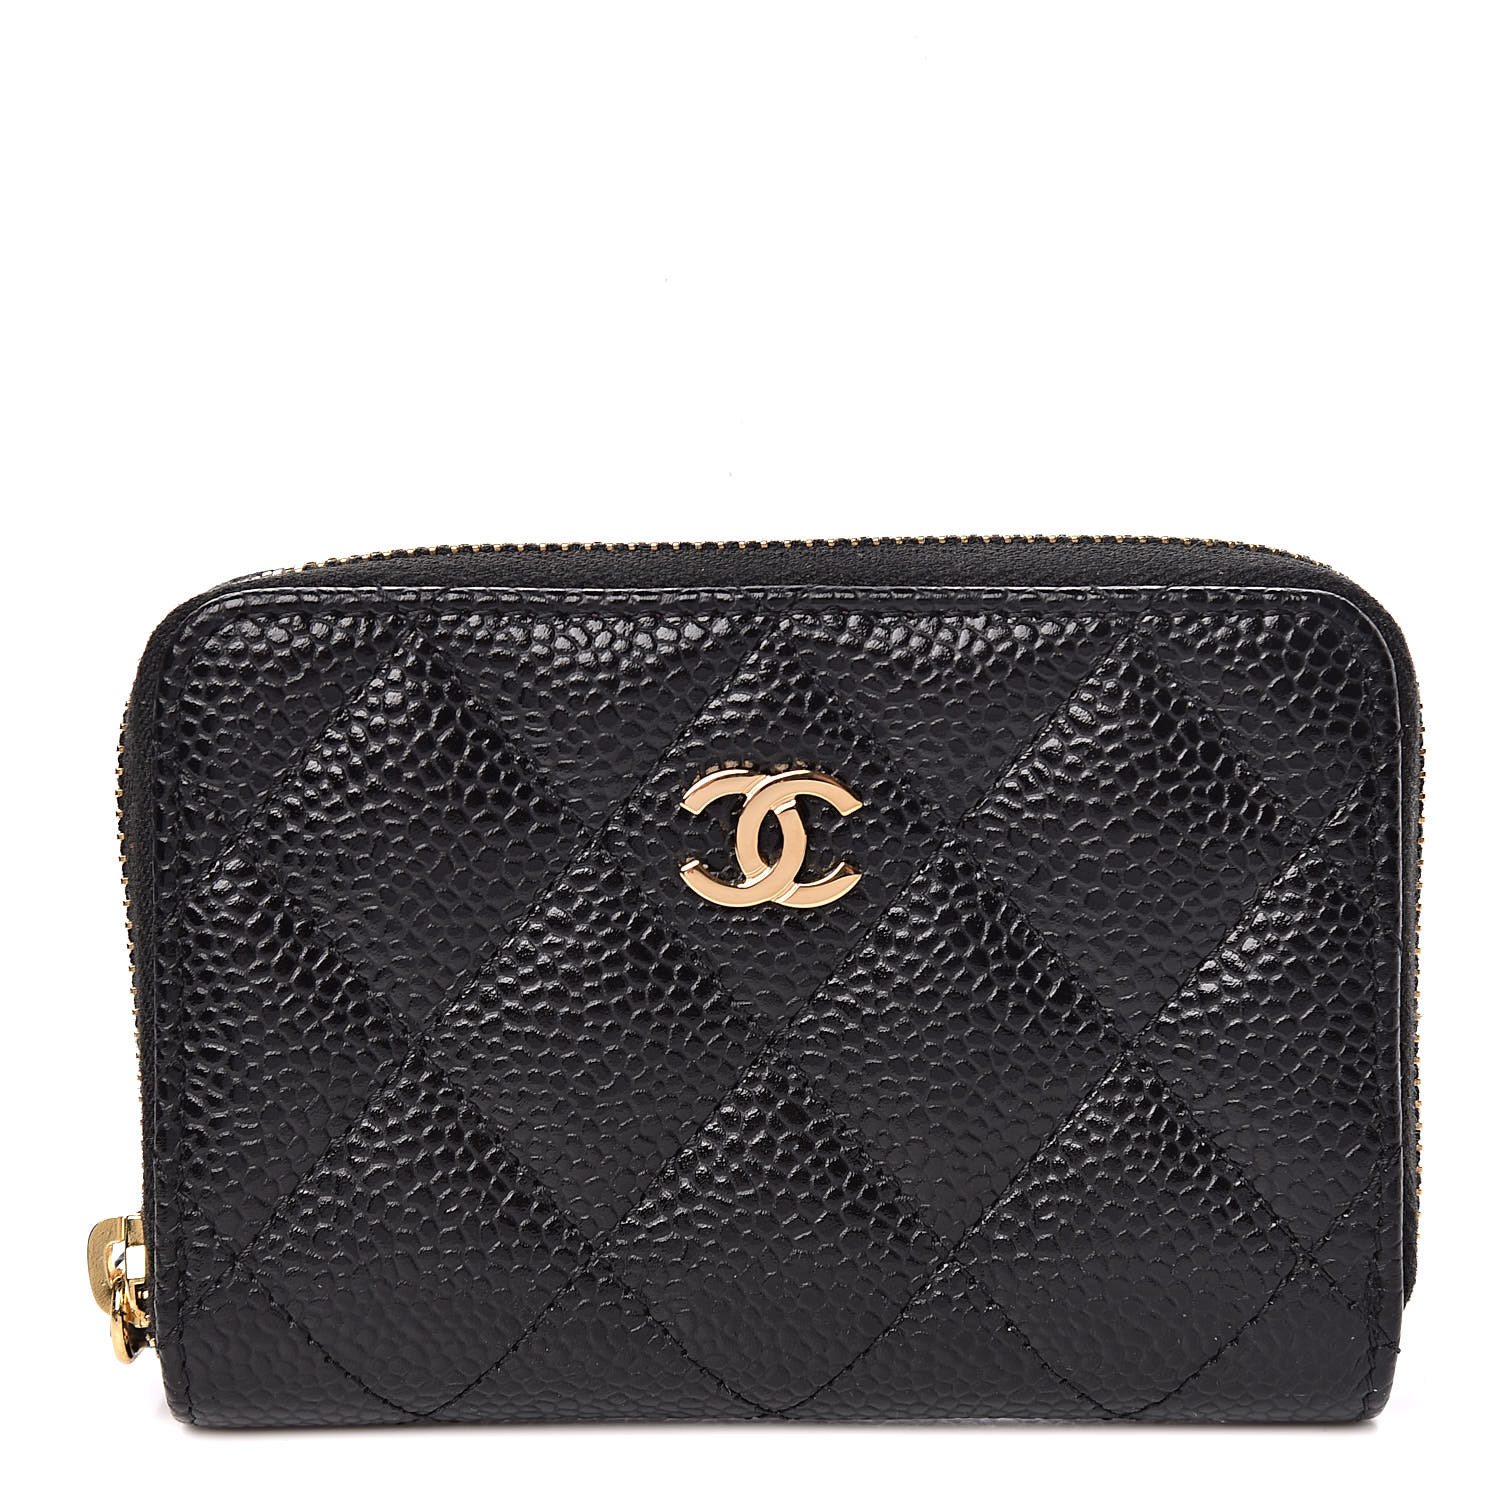 CHANEL Caviar Quilted Zip Coin Purse Black 459829